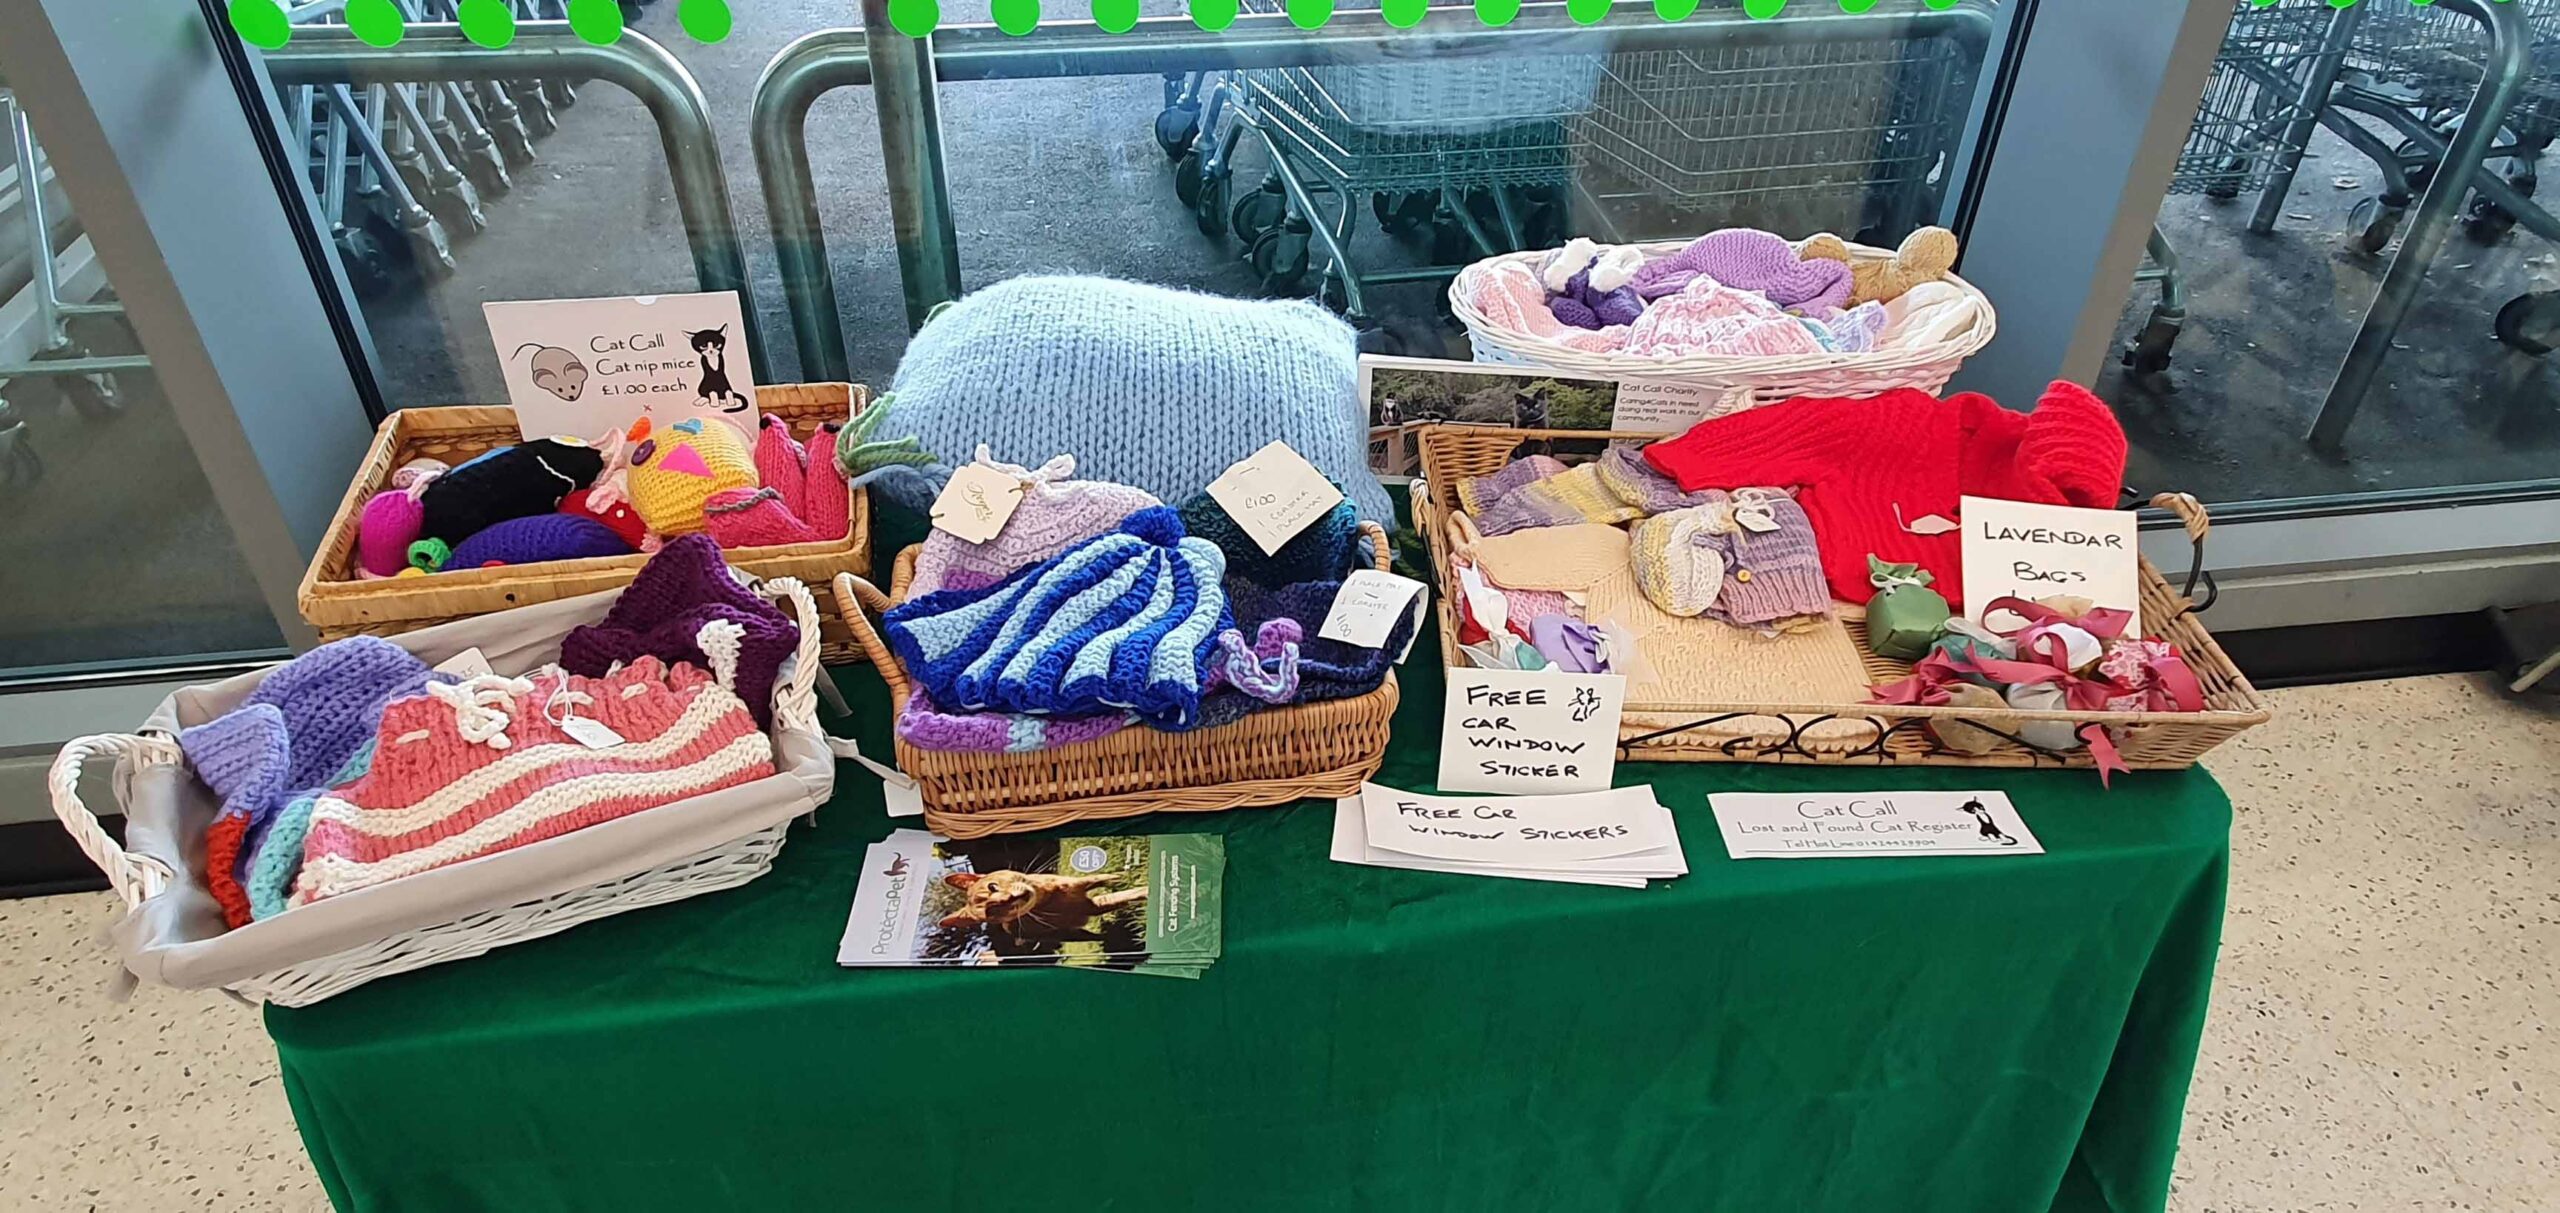 Hand made items sold by cat Call Charity